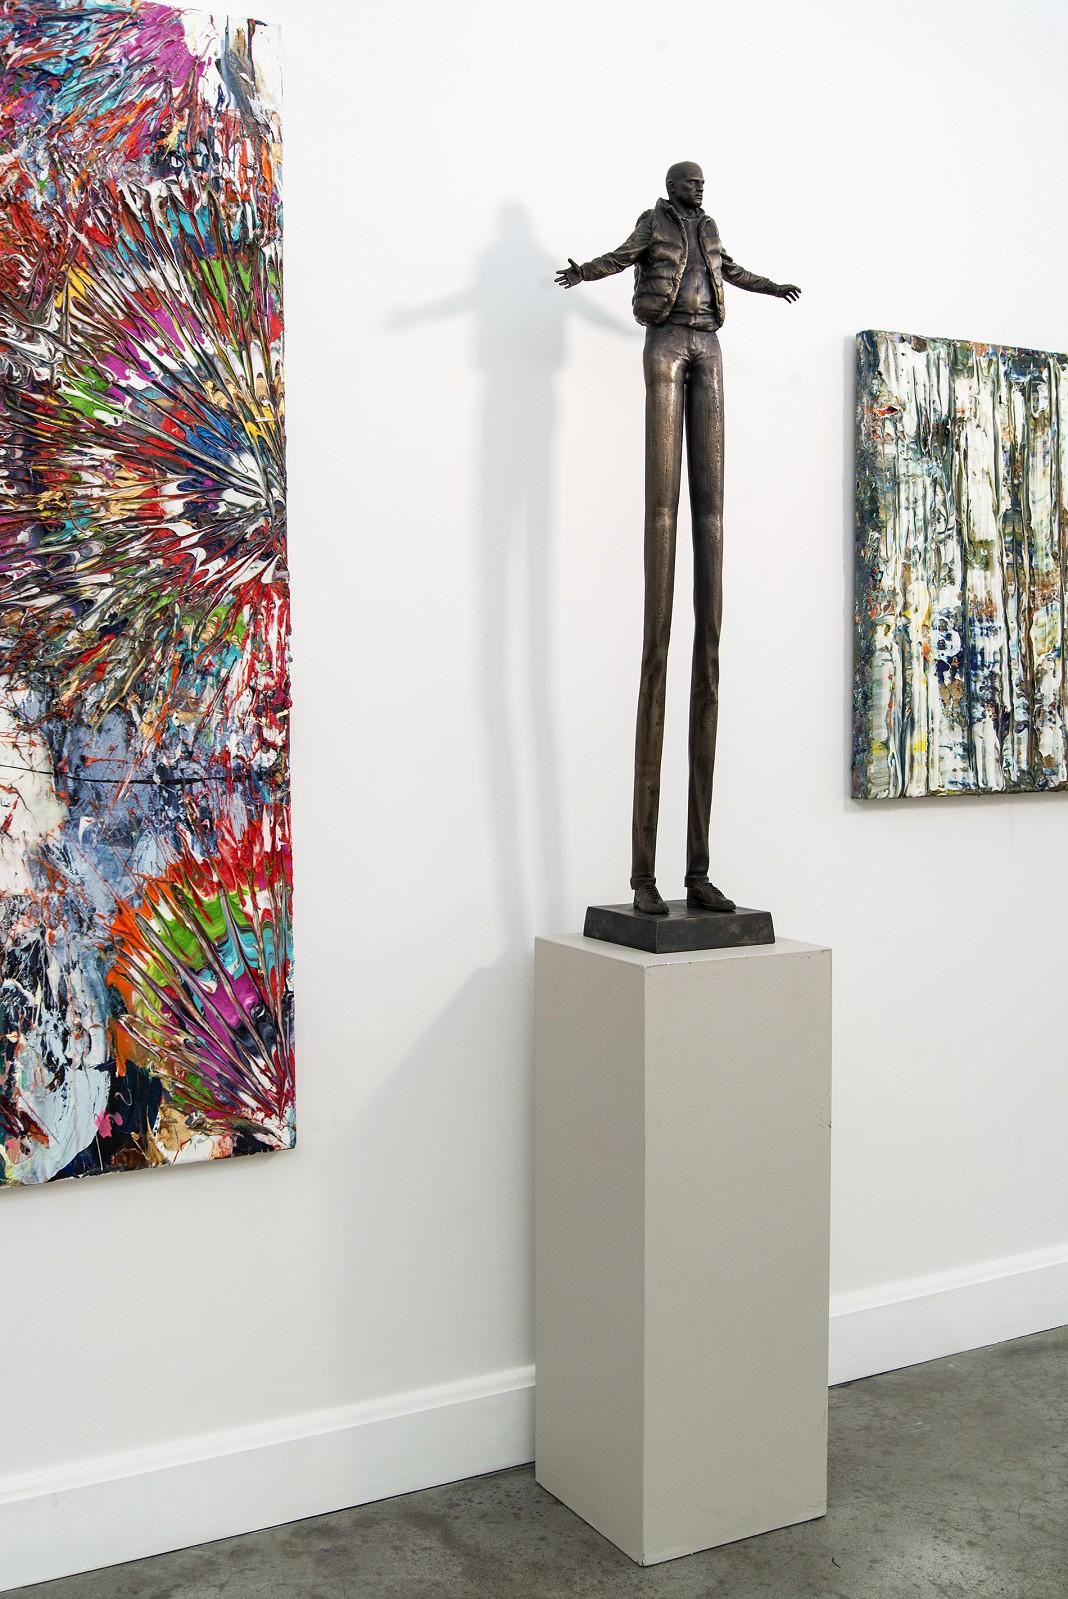 Enlarging Perspective - Surreal stretched male figure in bronze - Gold Figurative Sculpture by Roch Smith